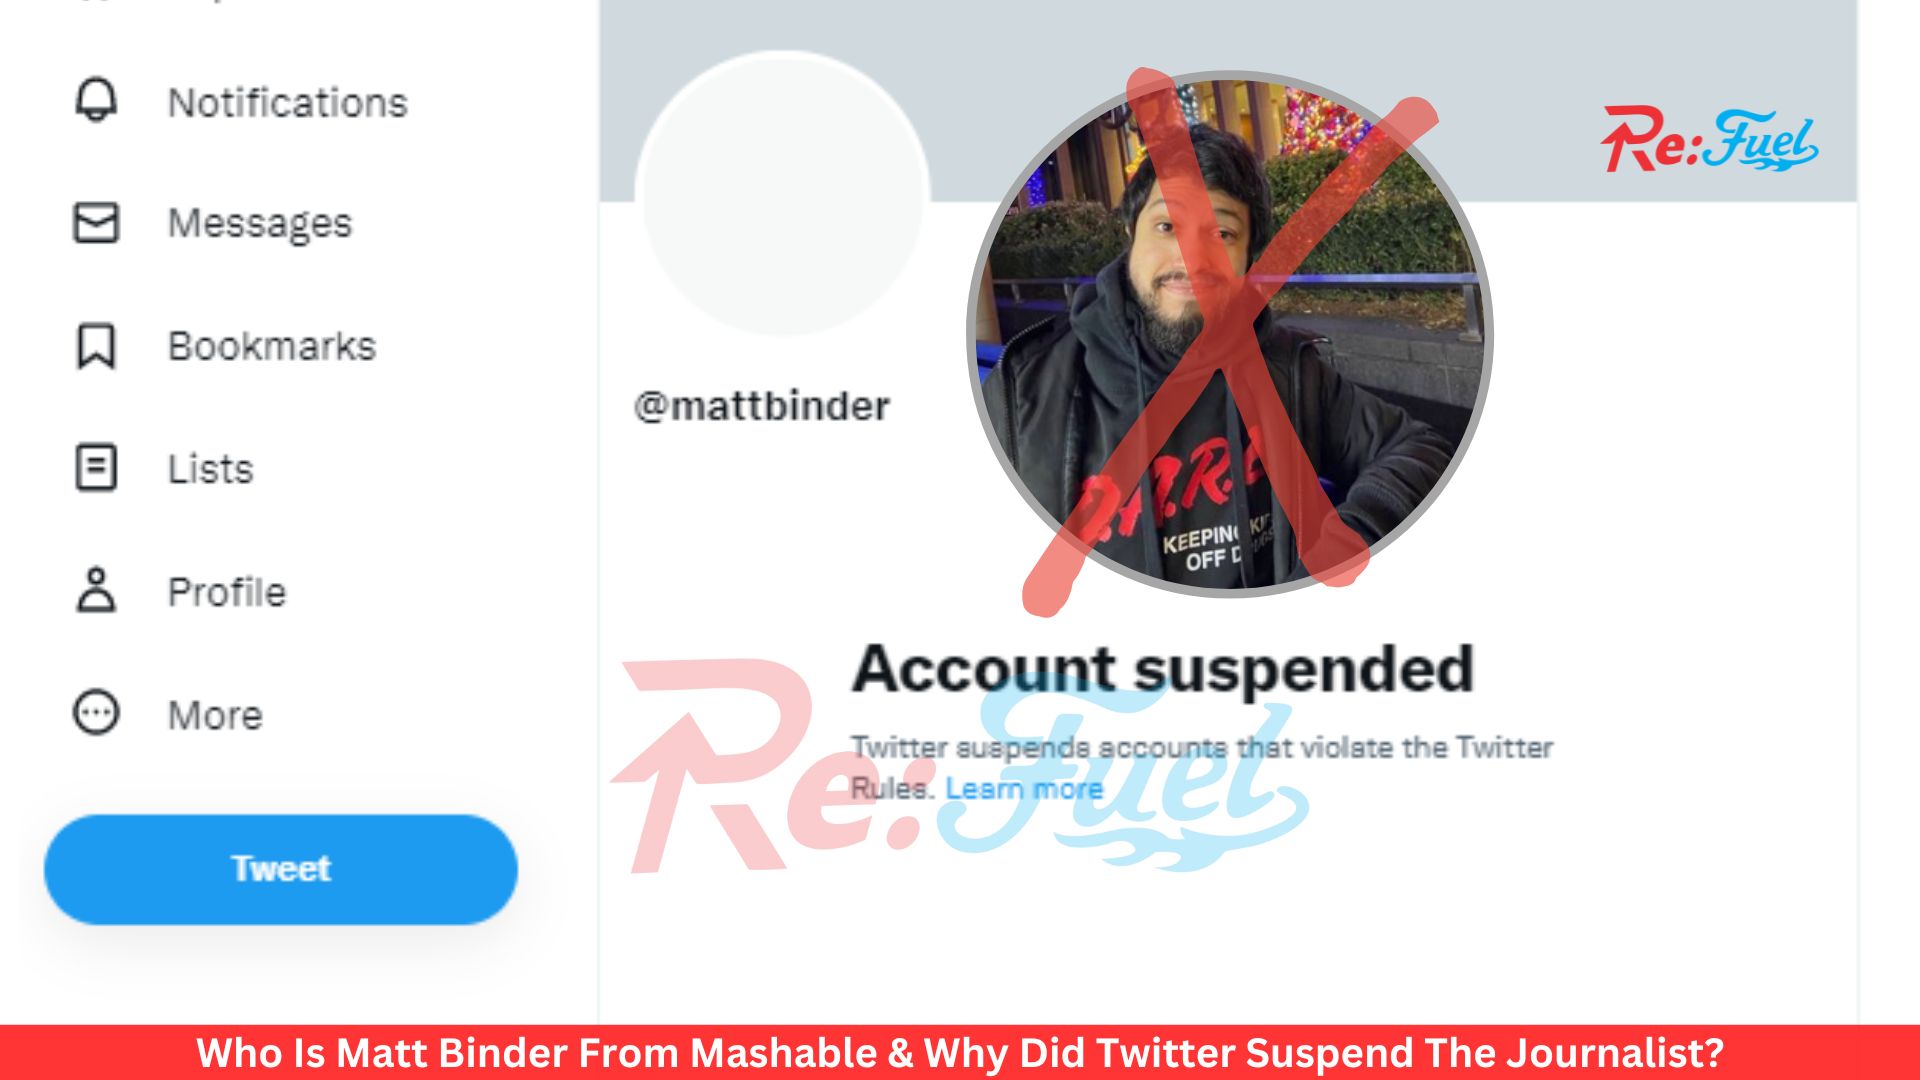 Who Is Matt Binder From Mashable & Why Did Twitter Suspend The Journalist?